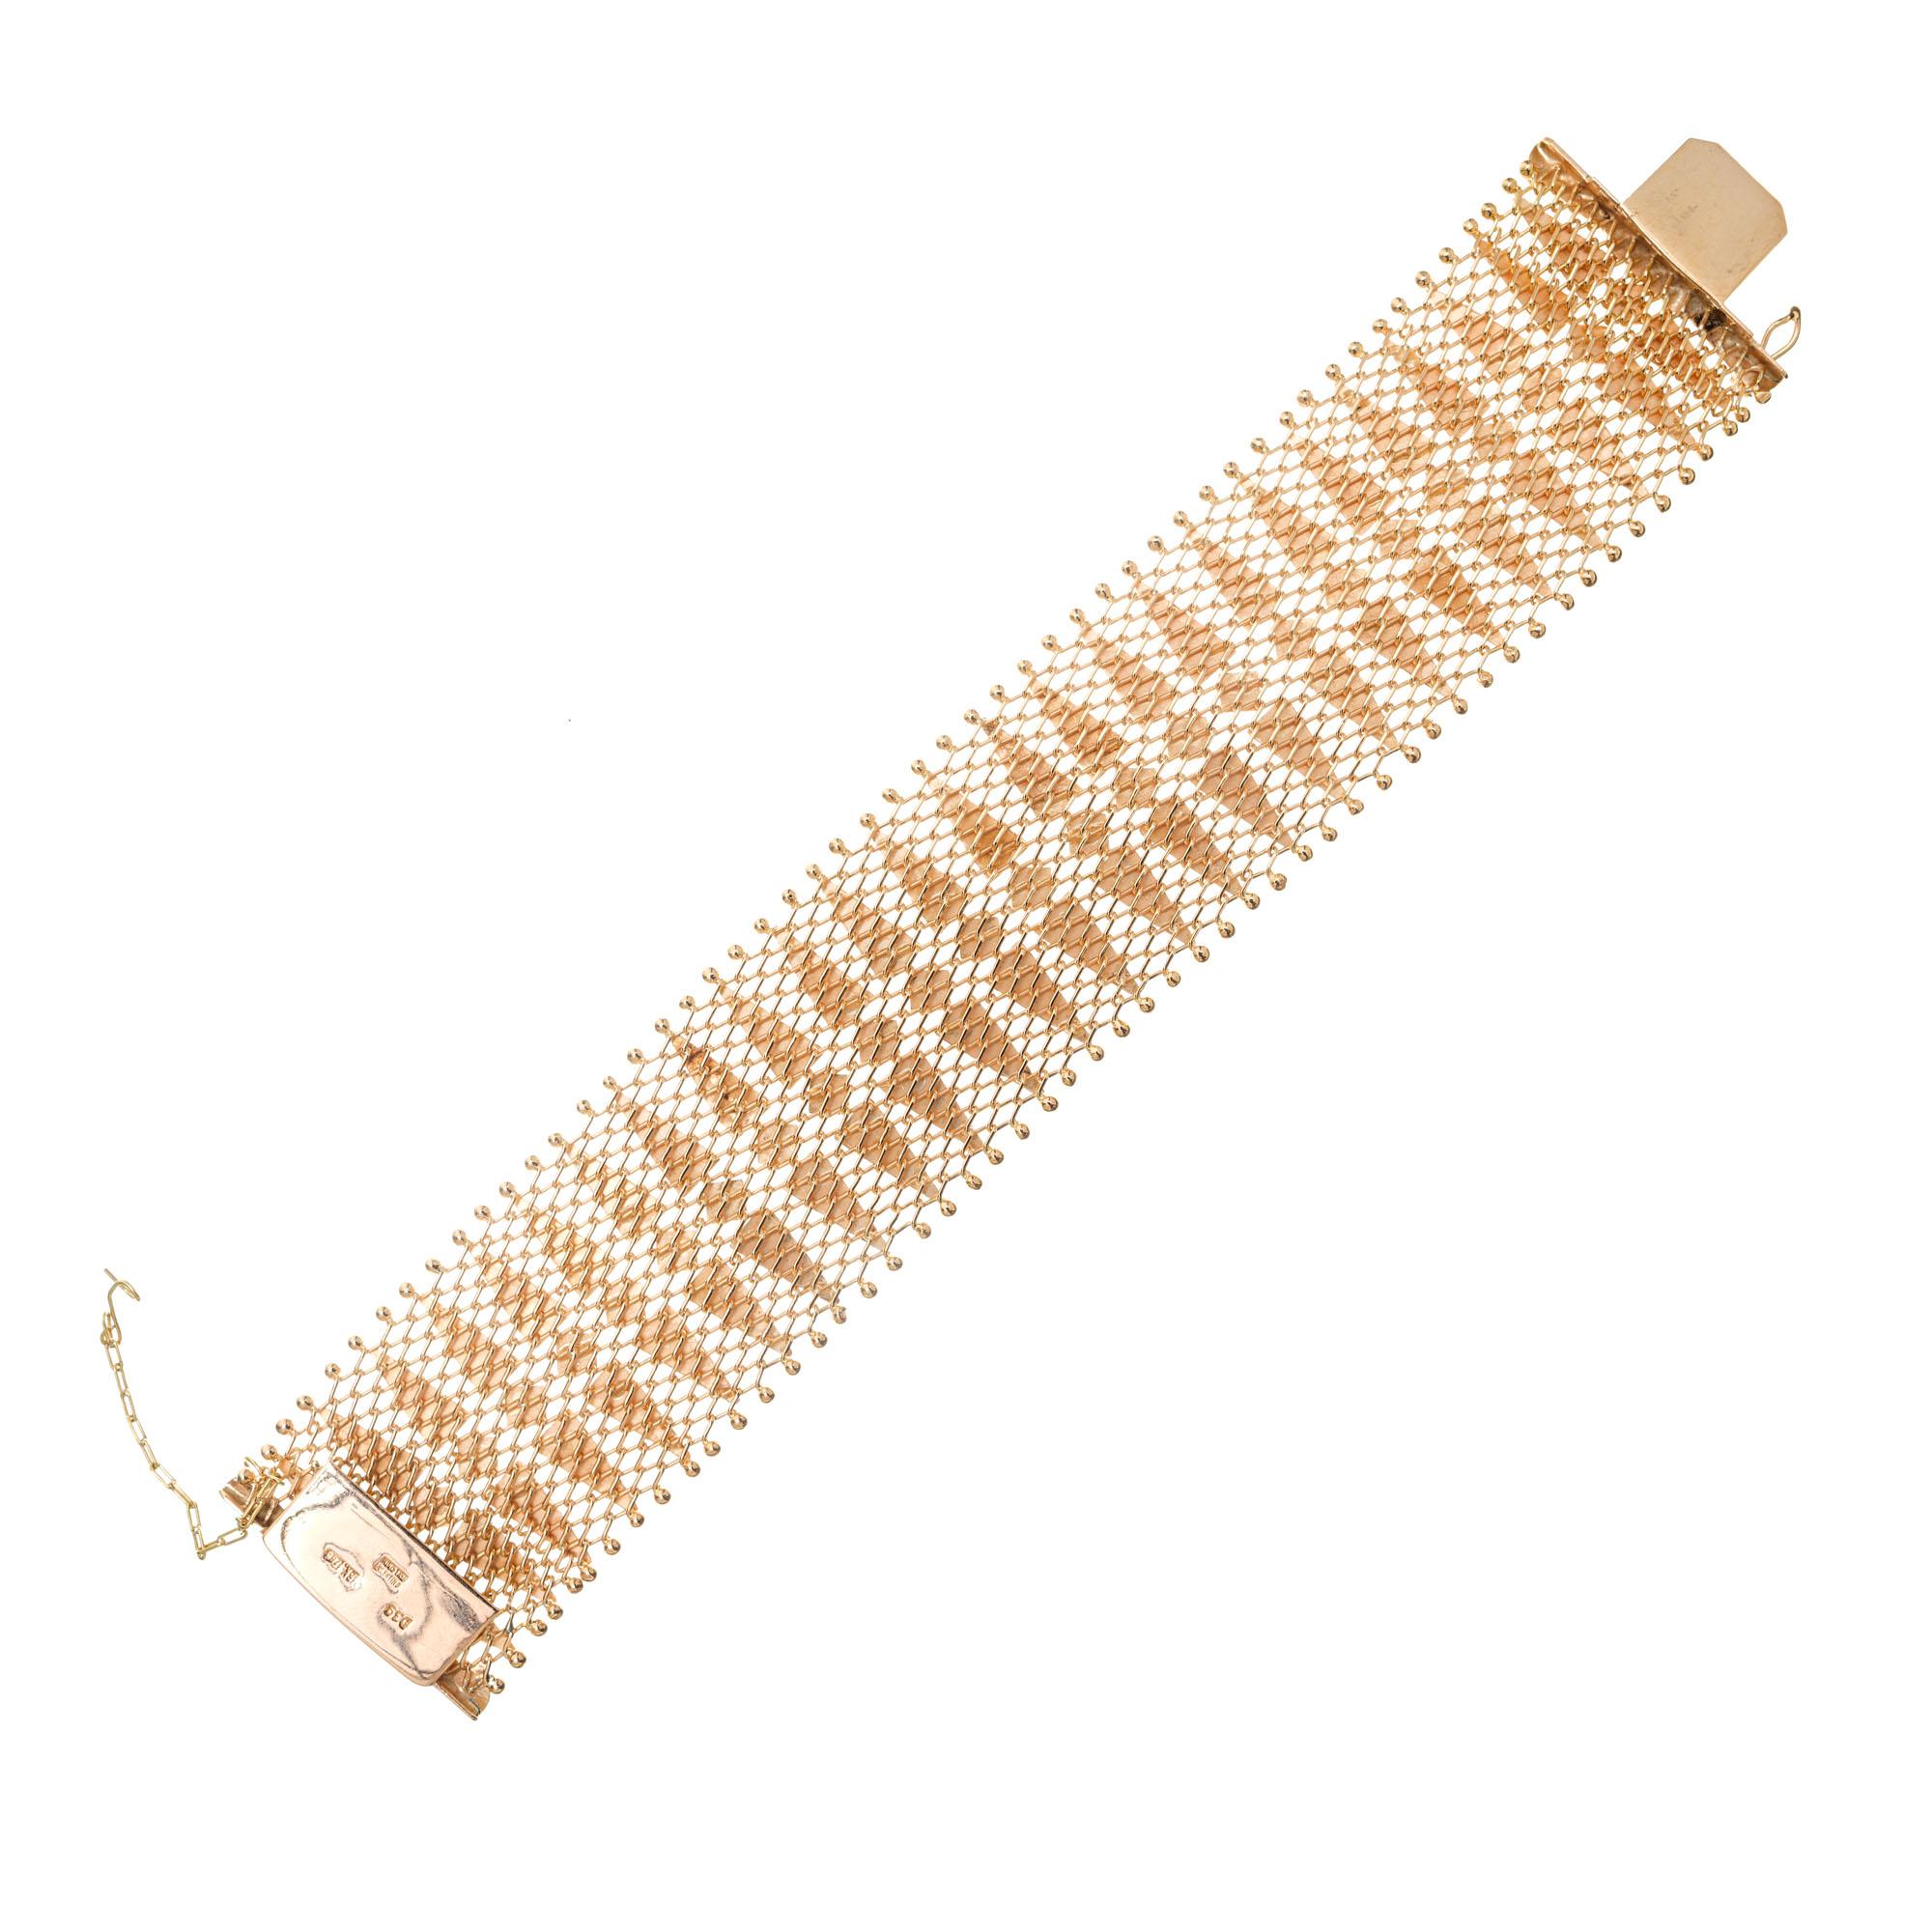 1950's 1.25 Inch wide 18k rose gold bracelet from Argentina. Figure 8 safety chain. 7.25 inches in length. 

18k rose gold 
Stamped: 18k 750
Hallmark: Argentina 
54.9 grams
Total length: 7.25 Inch
Width: 34.0mm
Thickness/ depth: 4.0mm
